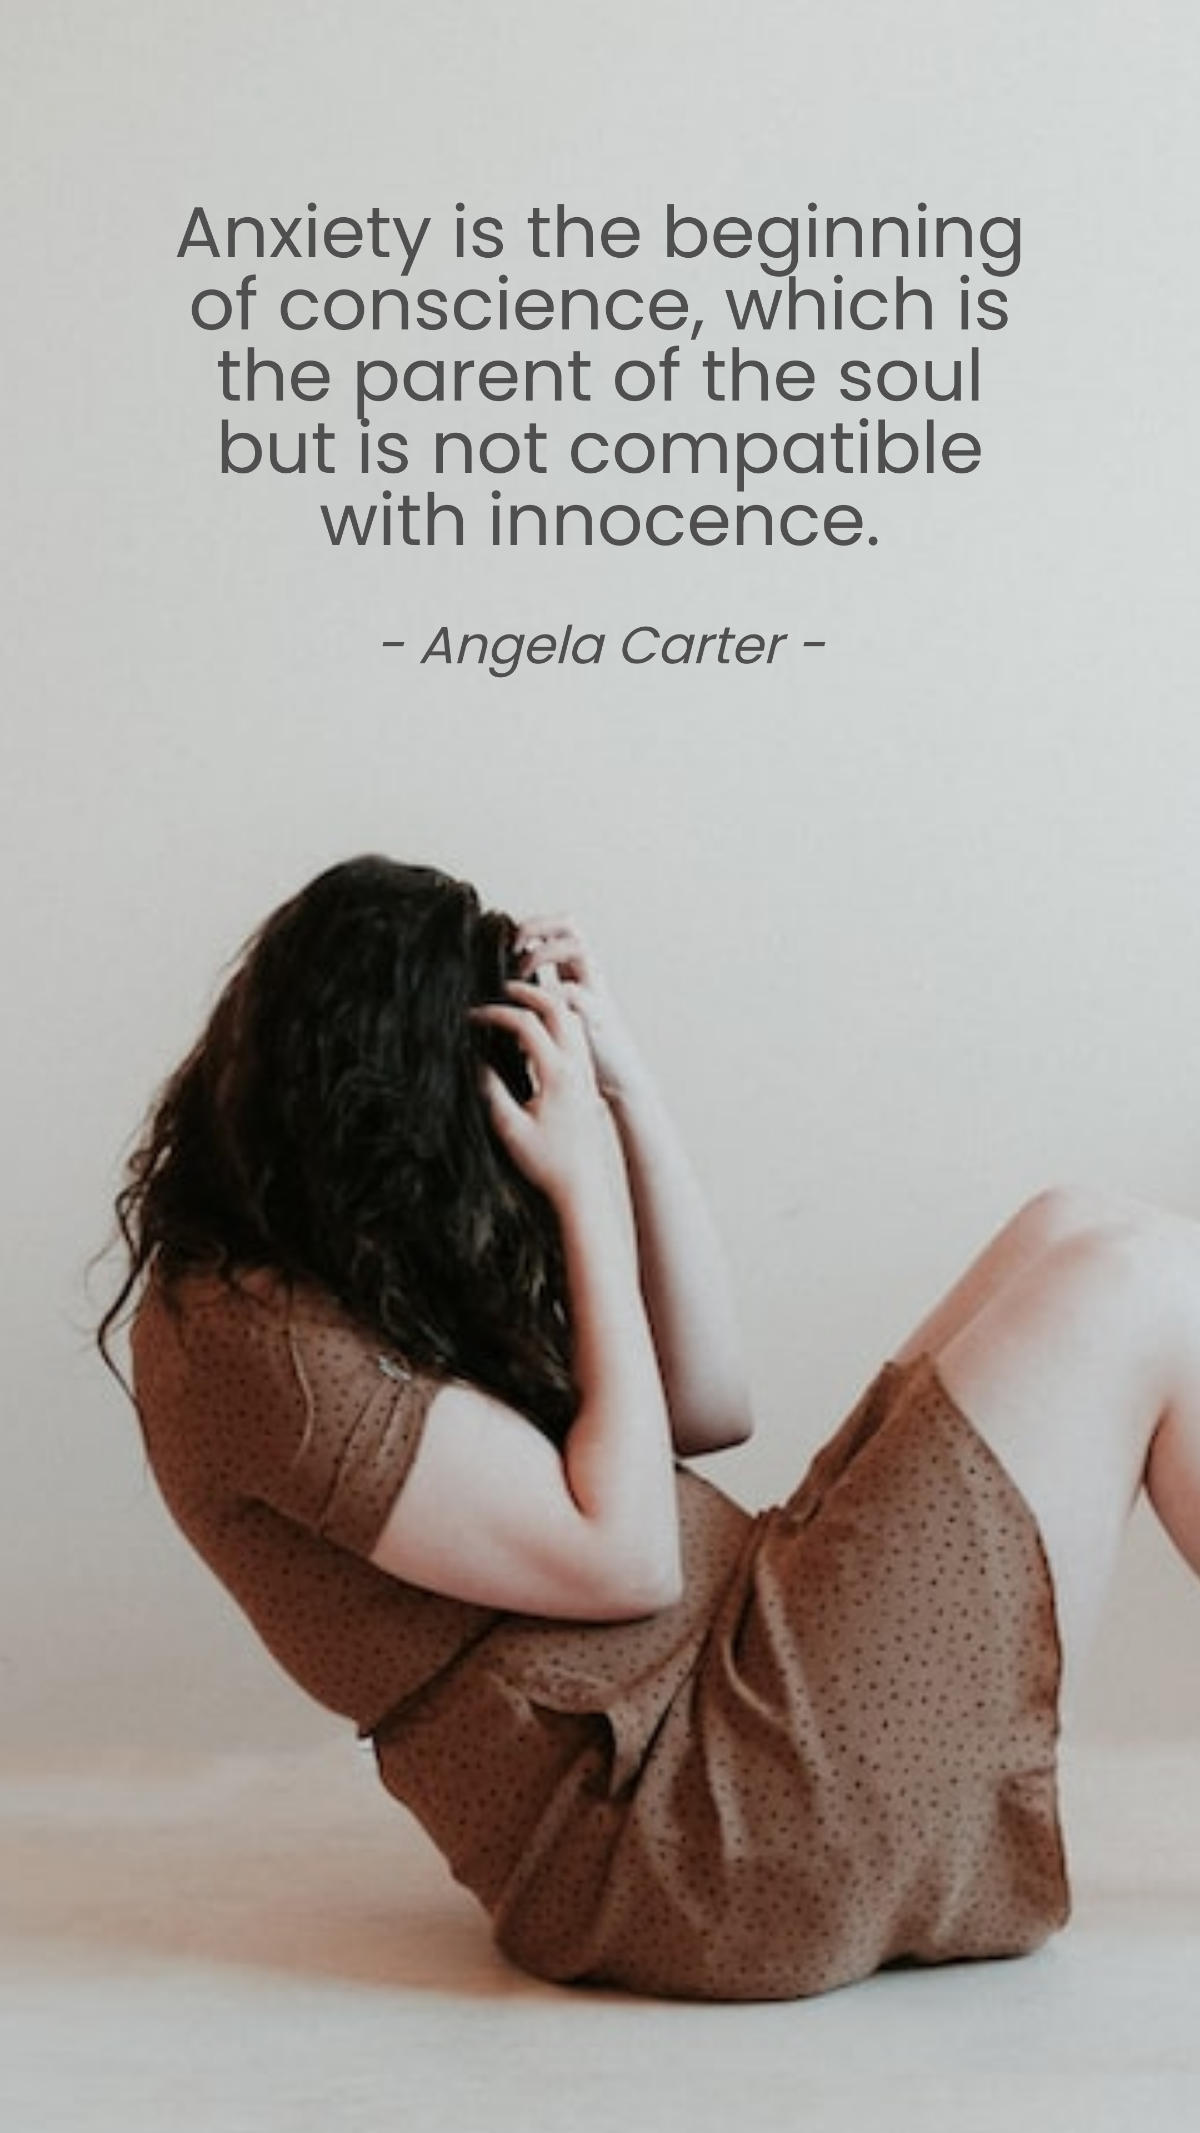 Free Angela Carter - Anxiety is the beginning of conscience, which is the parent of the soul but is not compatible with innocence. Template